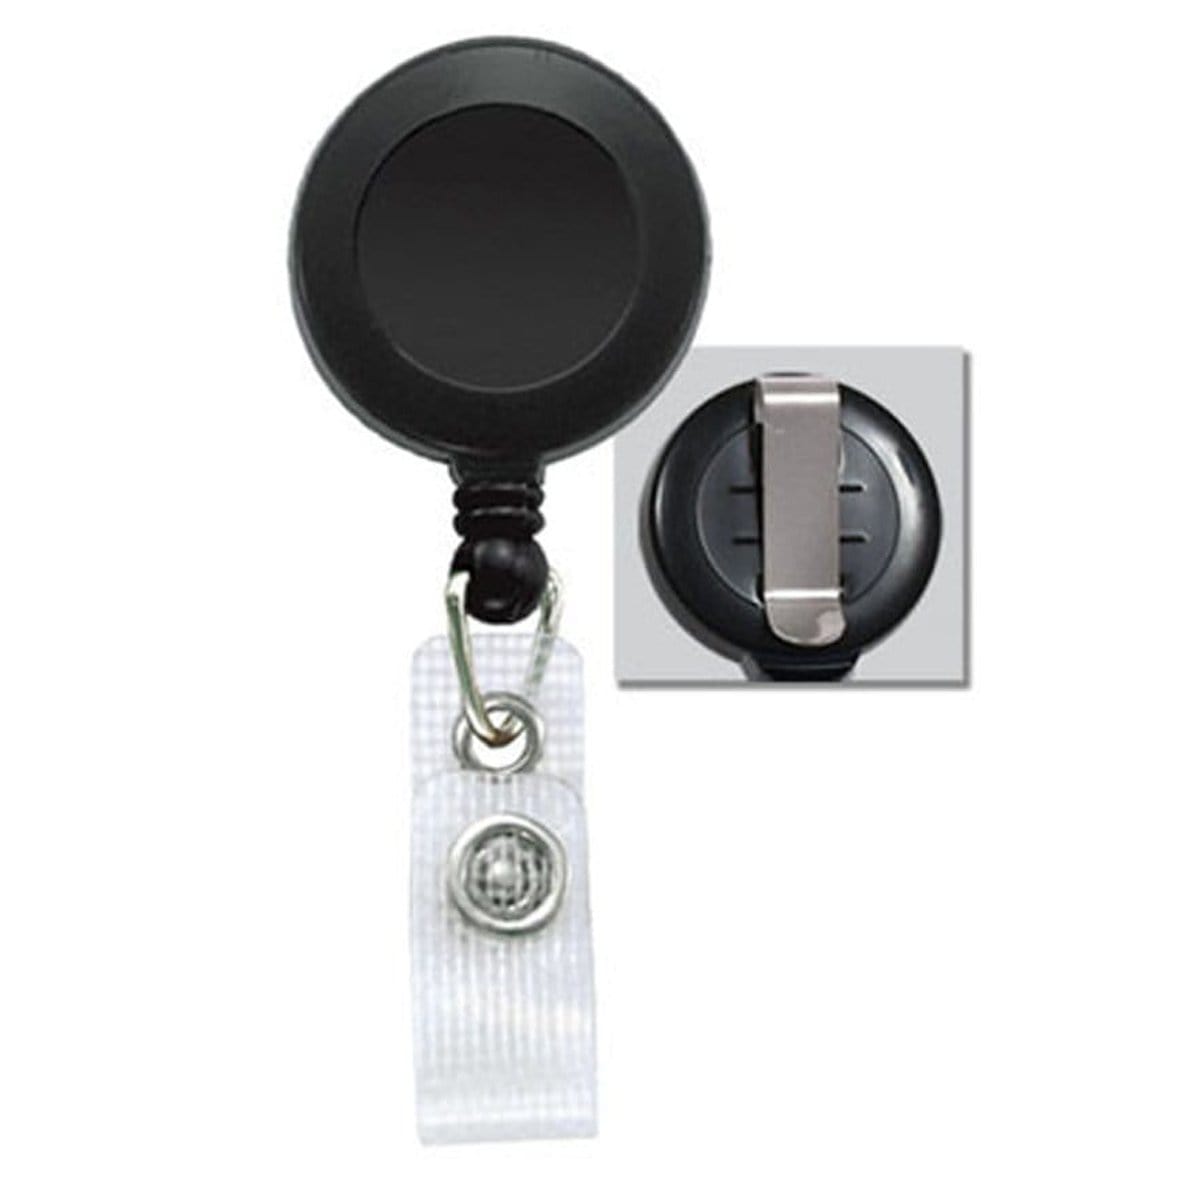 Black Badge Reel With Reinforced Vinyl Strap and Belt Clip (P/N 2120-3001)  and more Solid Color Reels W/ Reinforced Vinyl Strap at